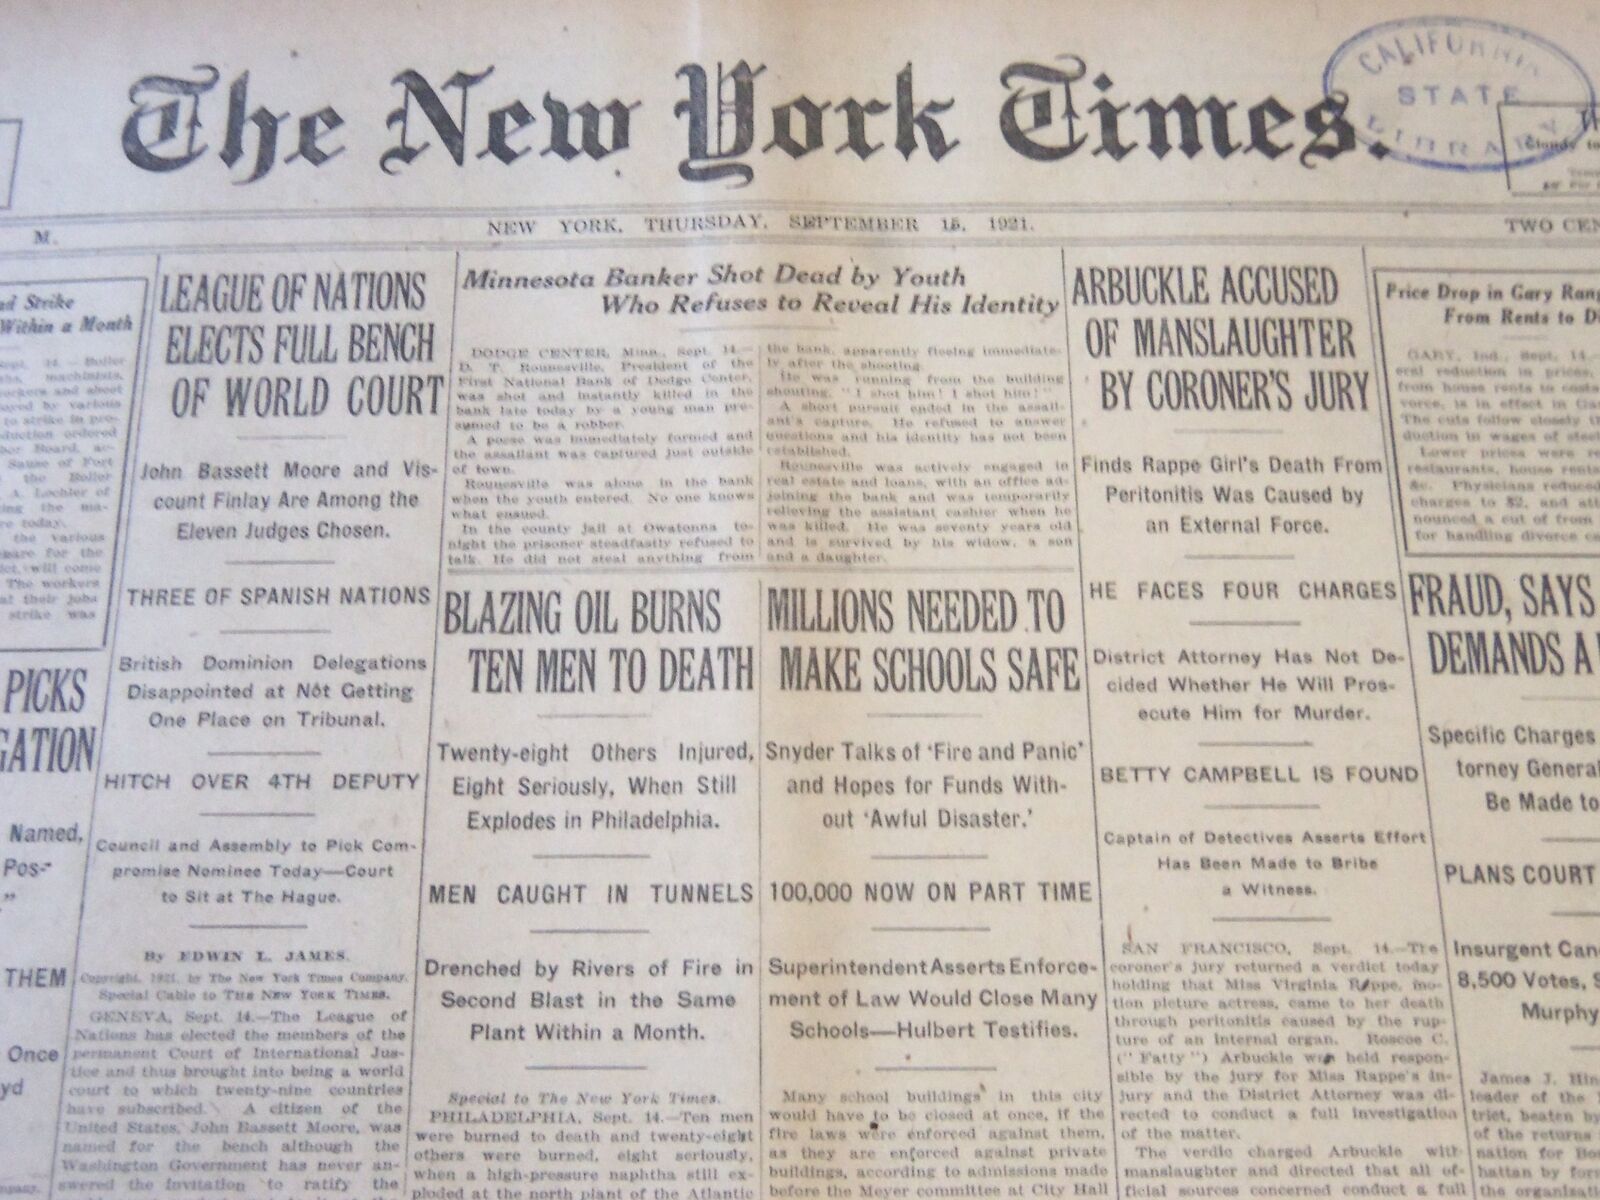 1921 SEPT 15 NEW YORK TIMES - ARBUCKLE ACCUSED OF MANSLAUGHTER BY JURY - NT 6469